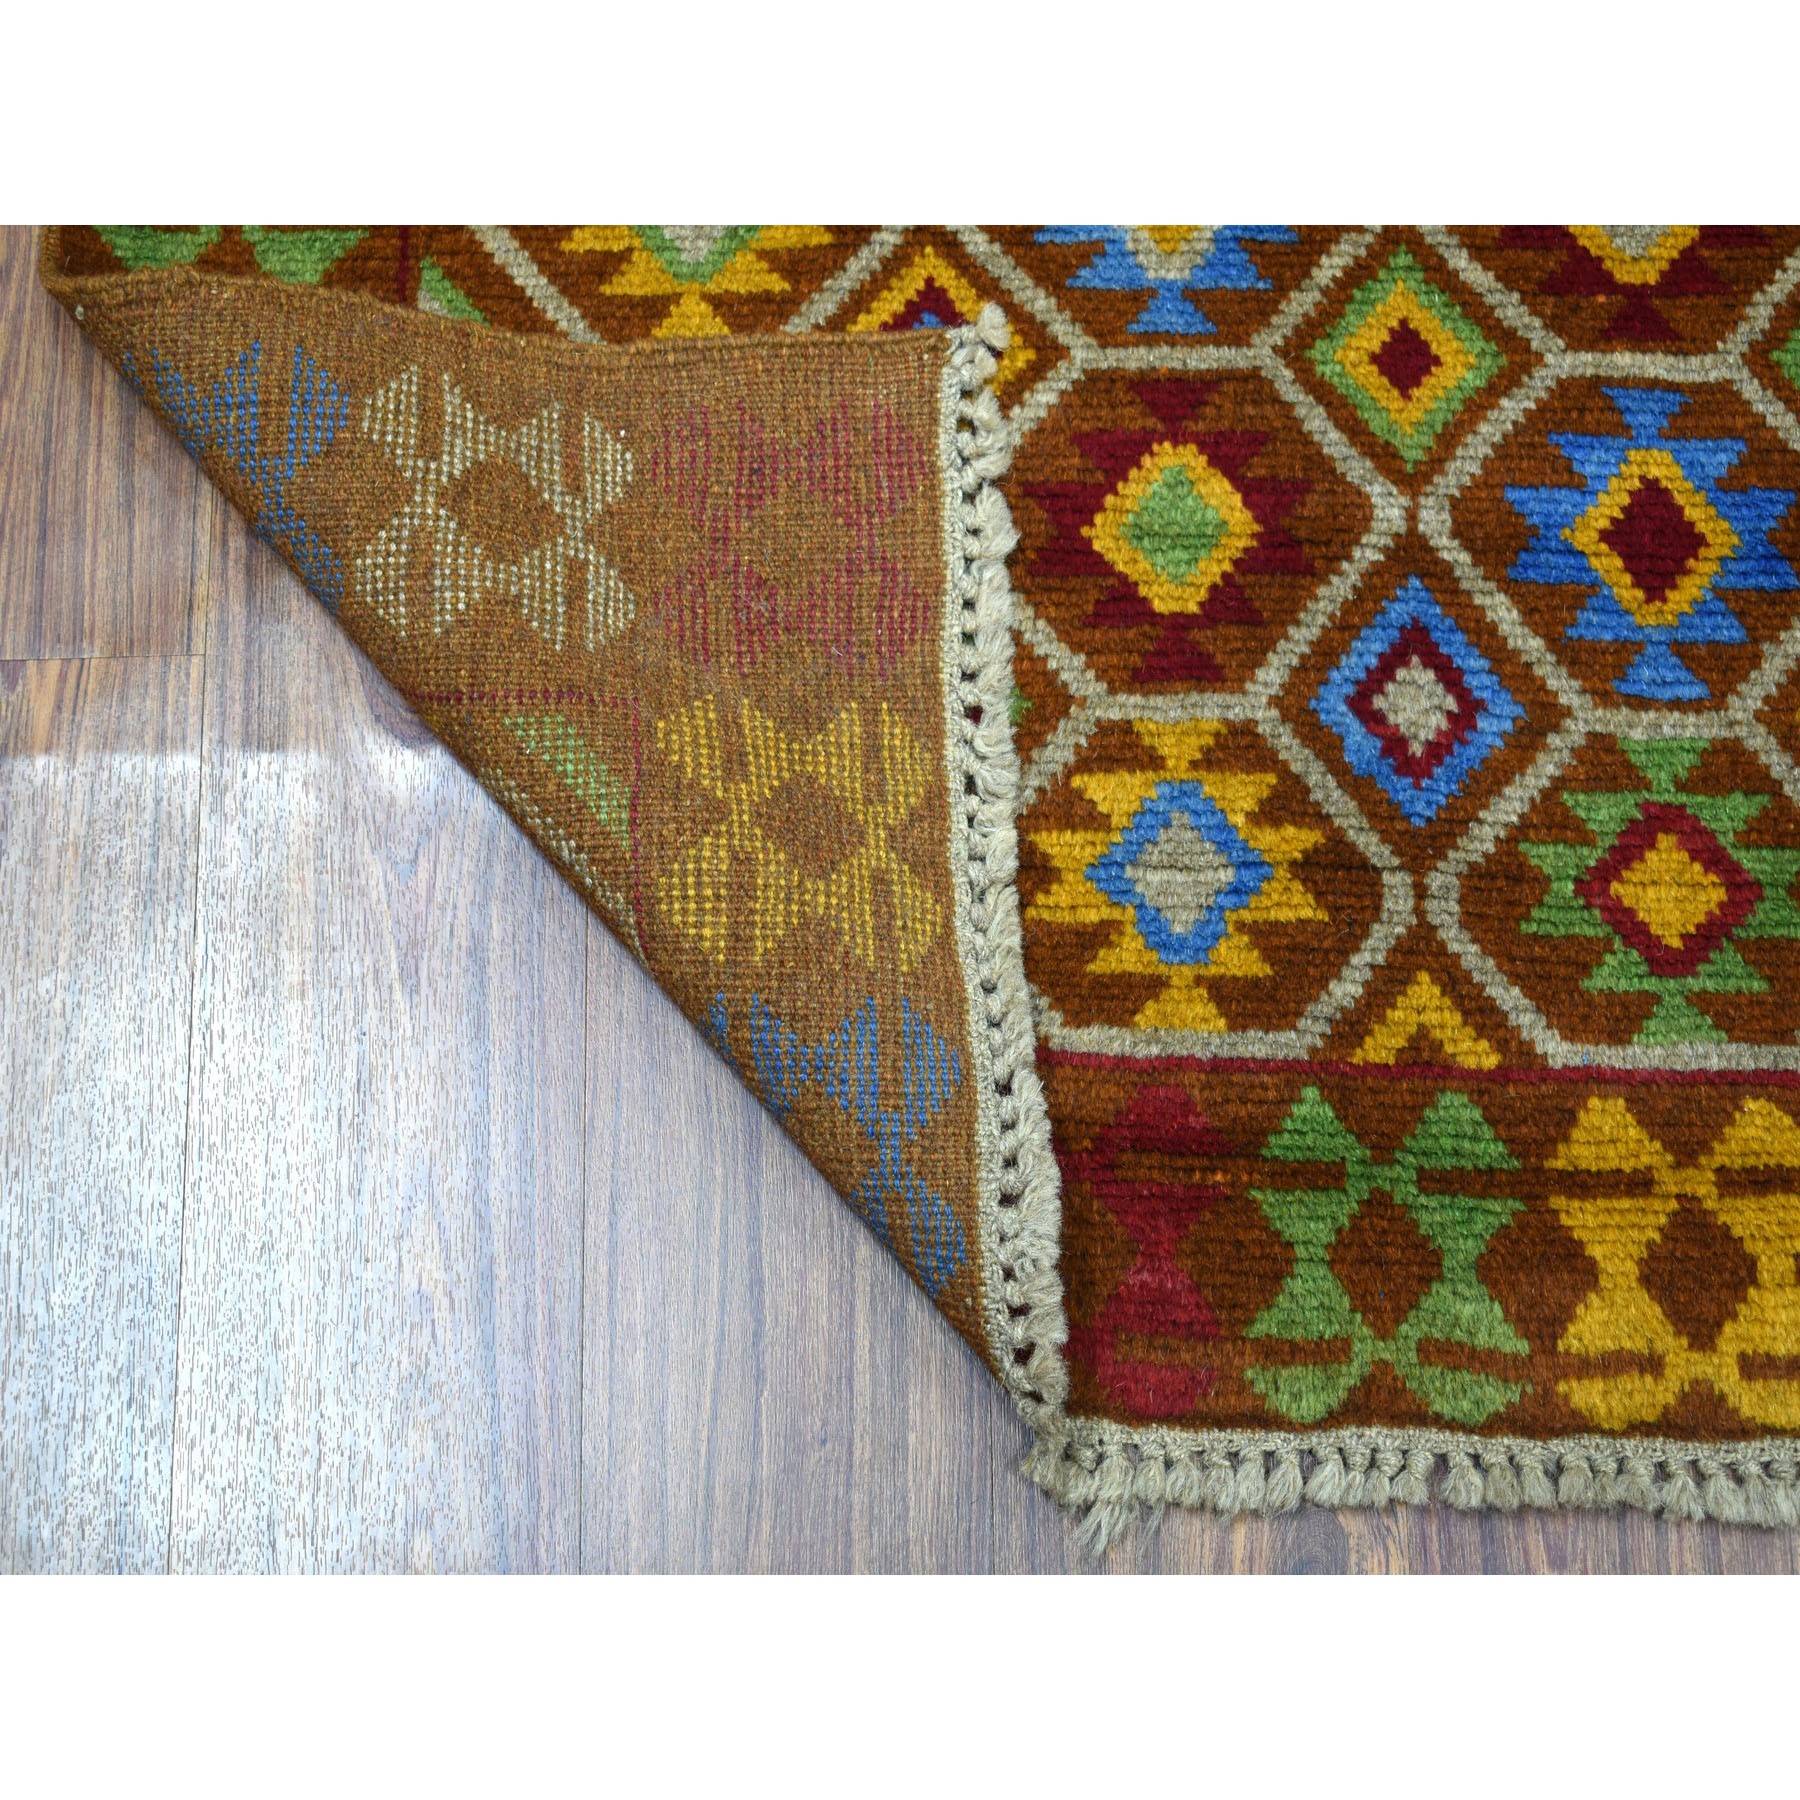 3'6"x5'9" Brown Tribal Design Colorful Afghan Baluch Pure Wool Hand Woven Oriental Rug 